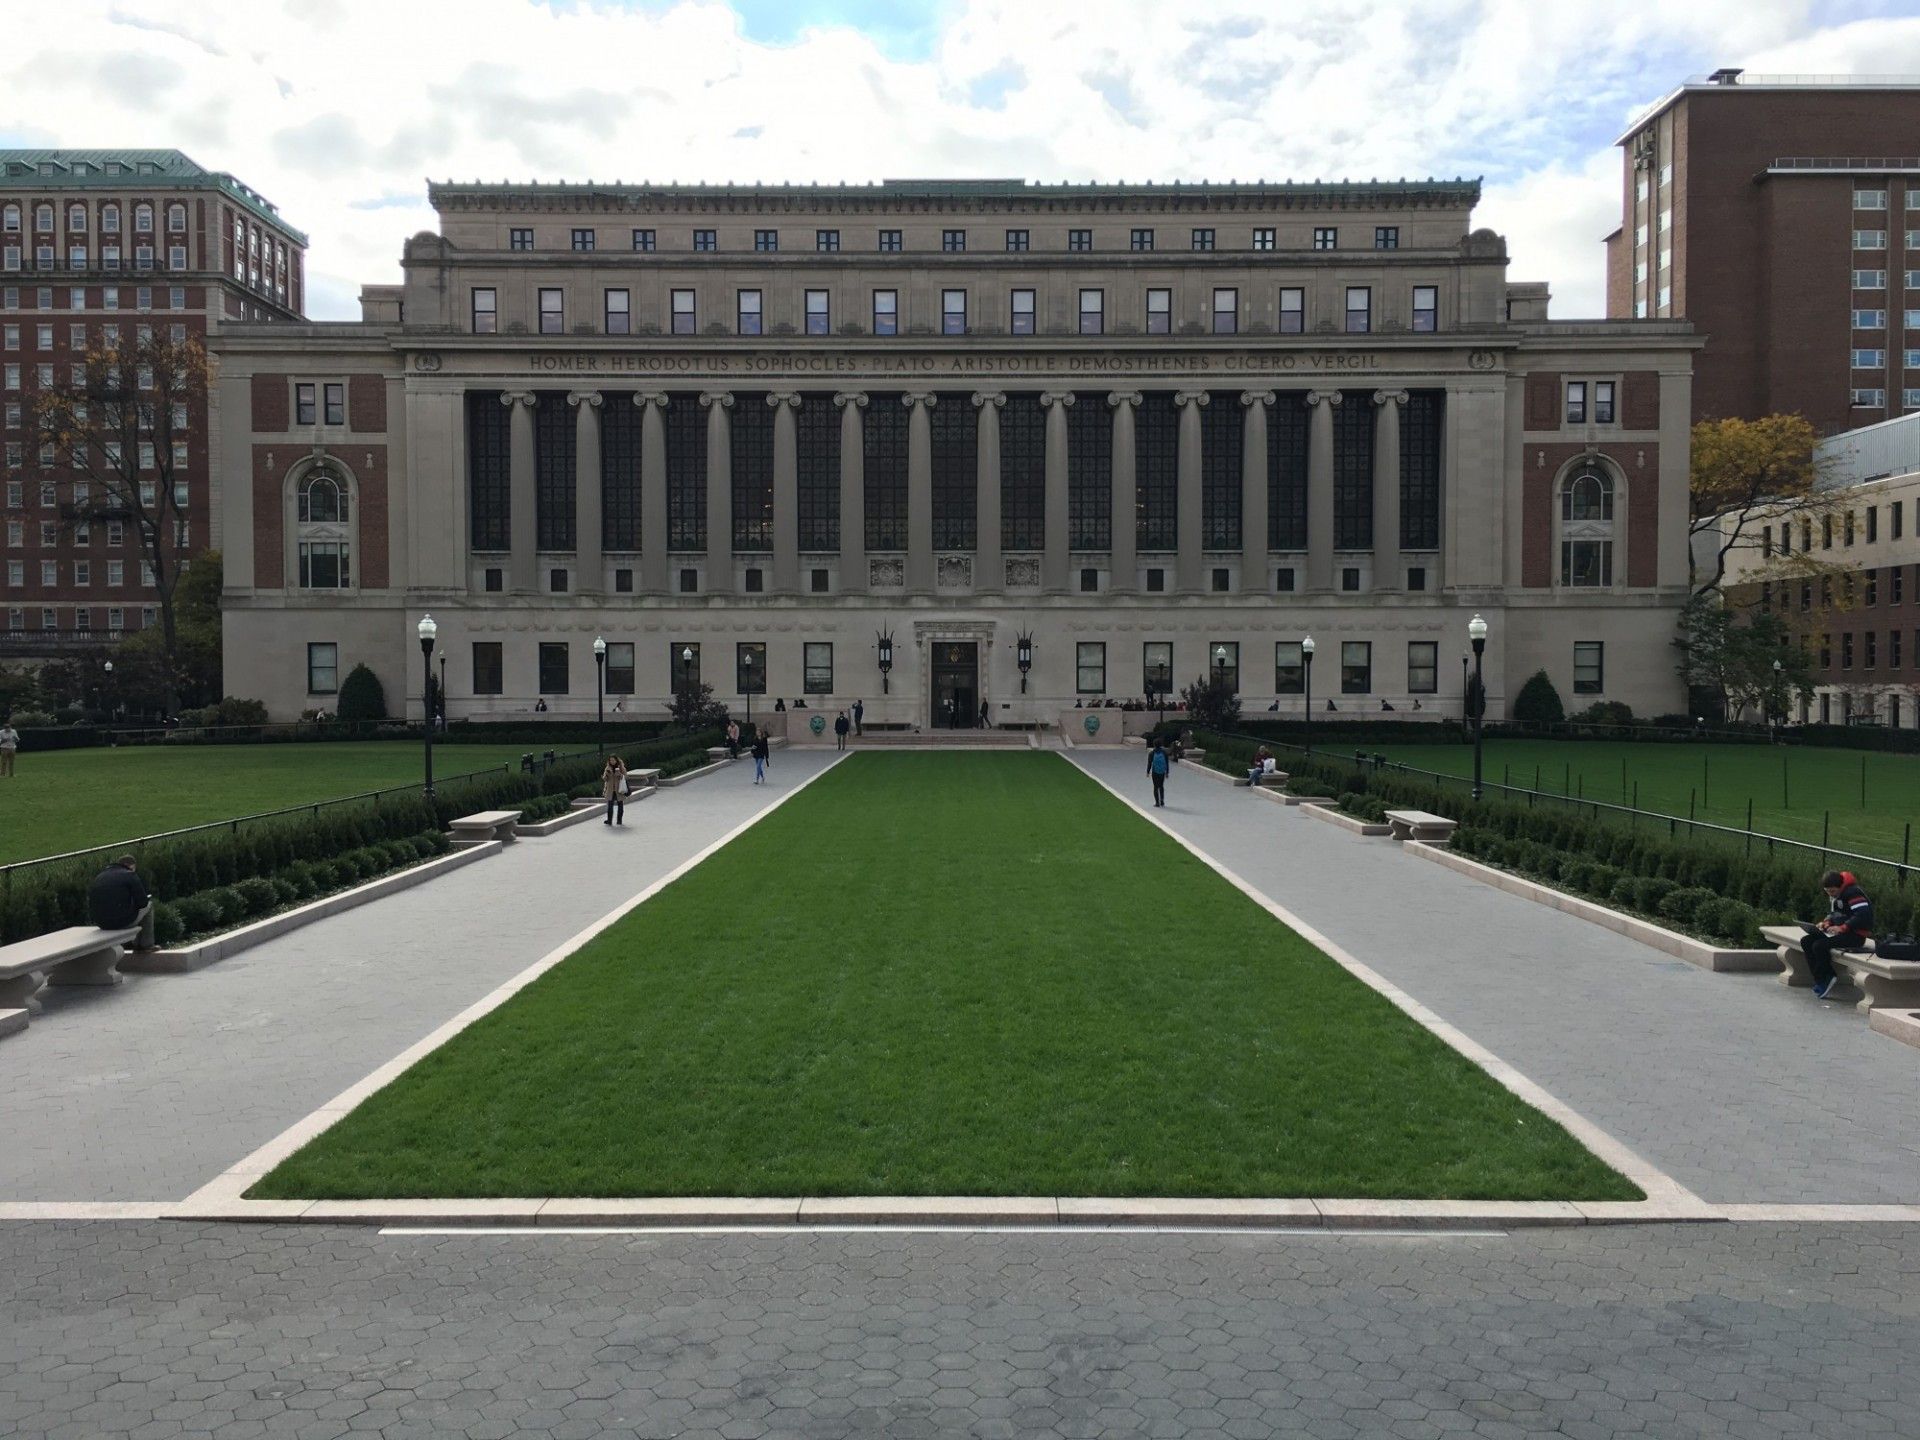 A large building with a green lawn in front of it - Columbia University